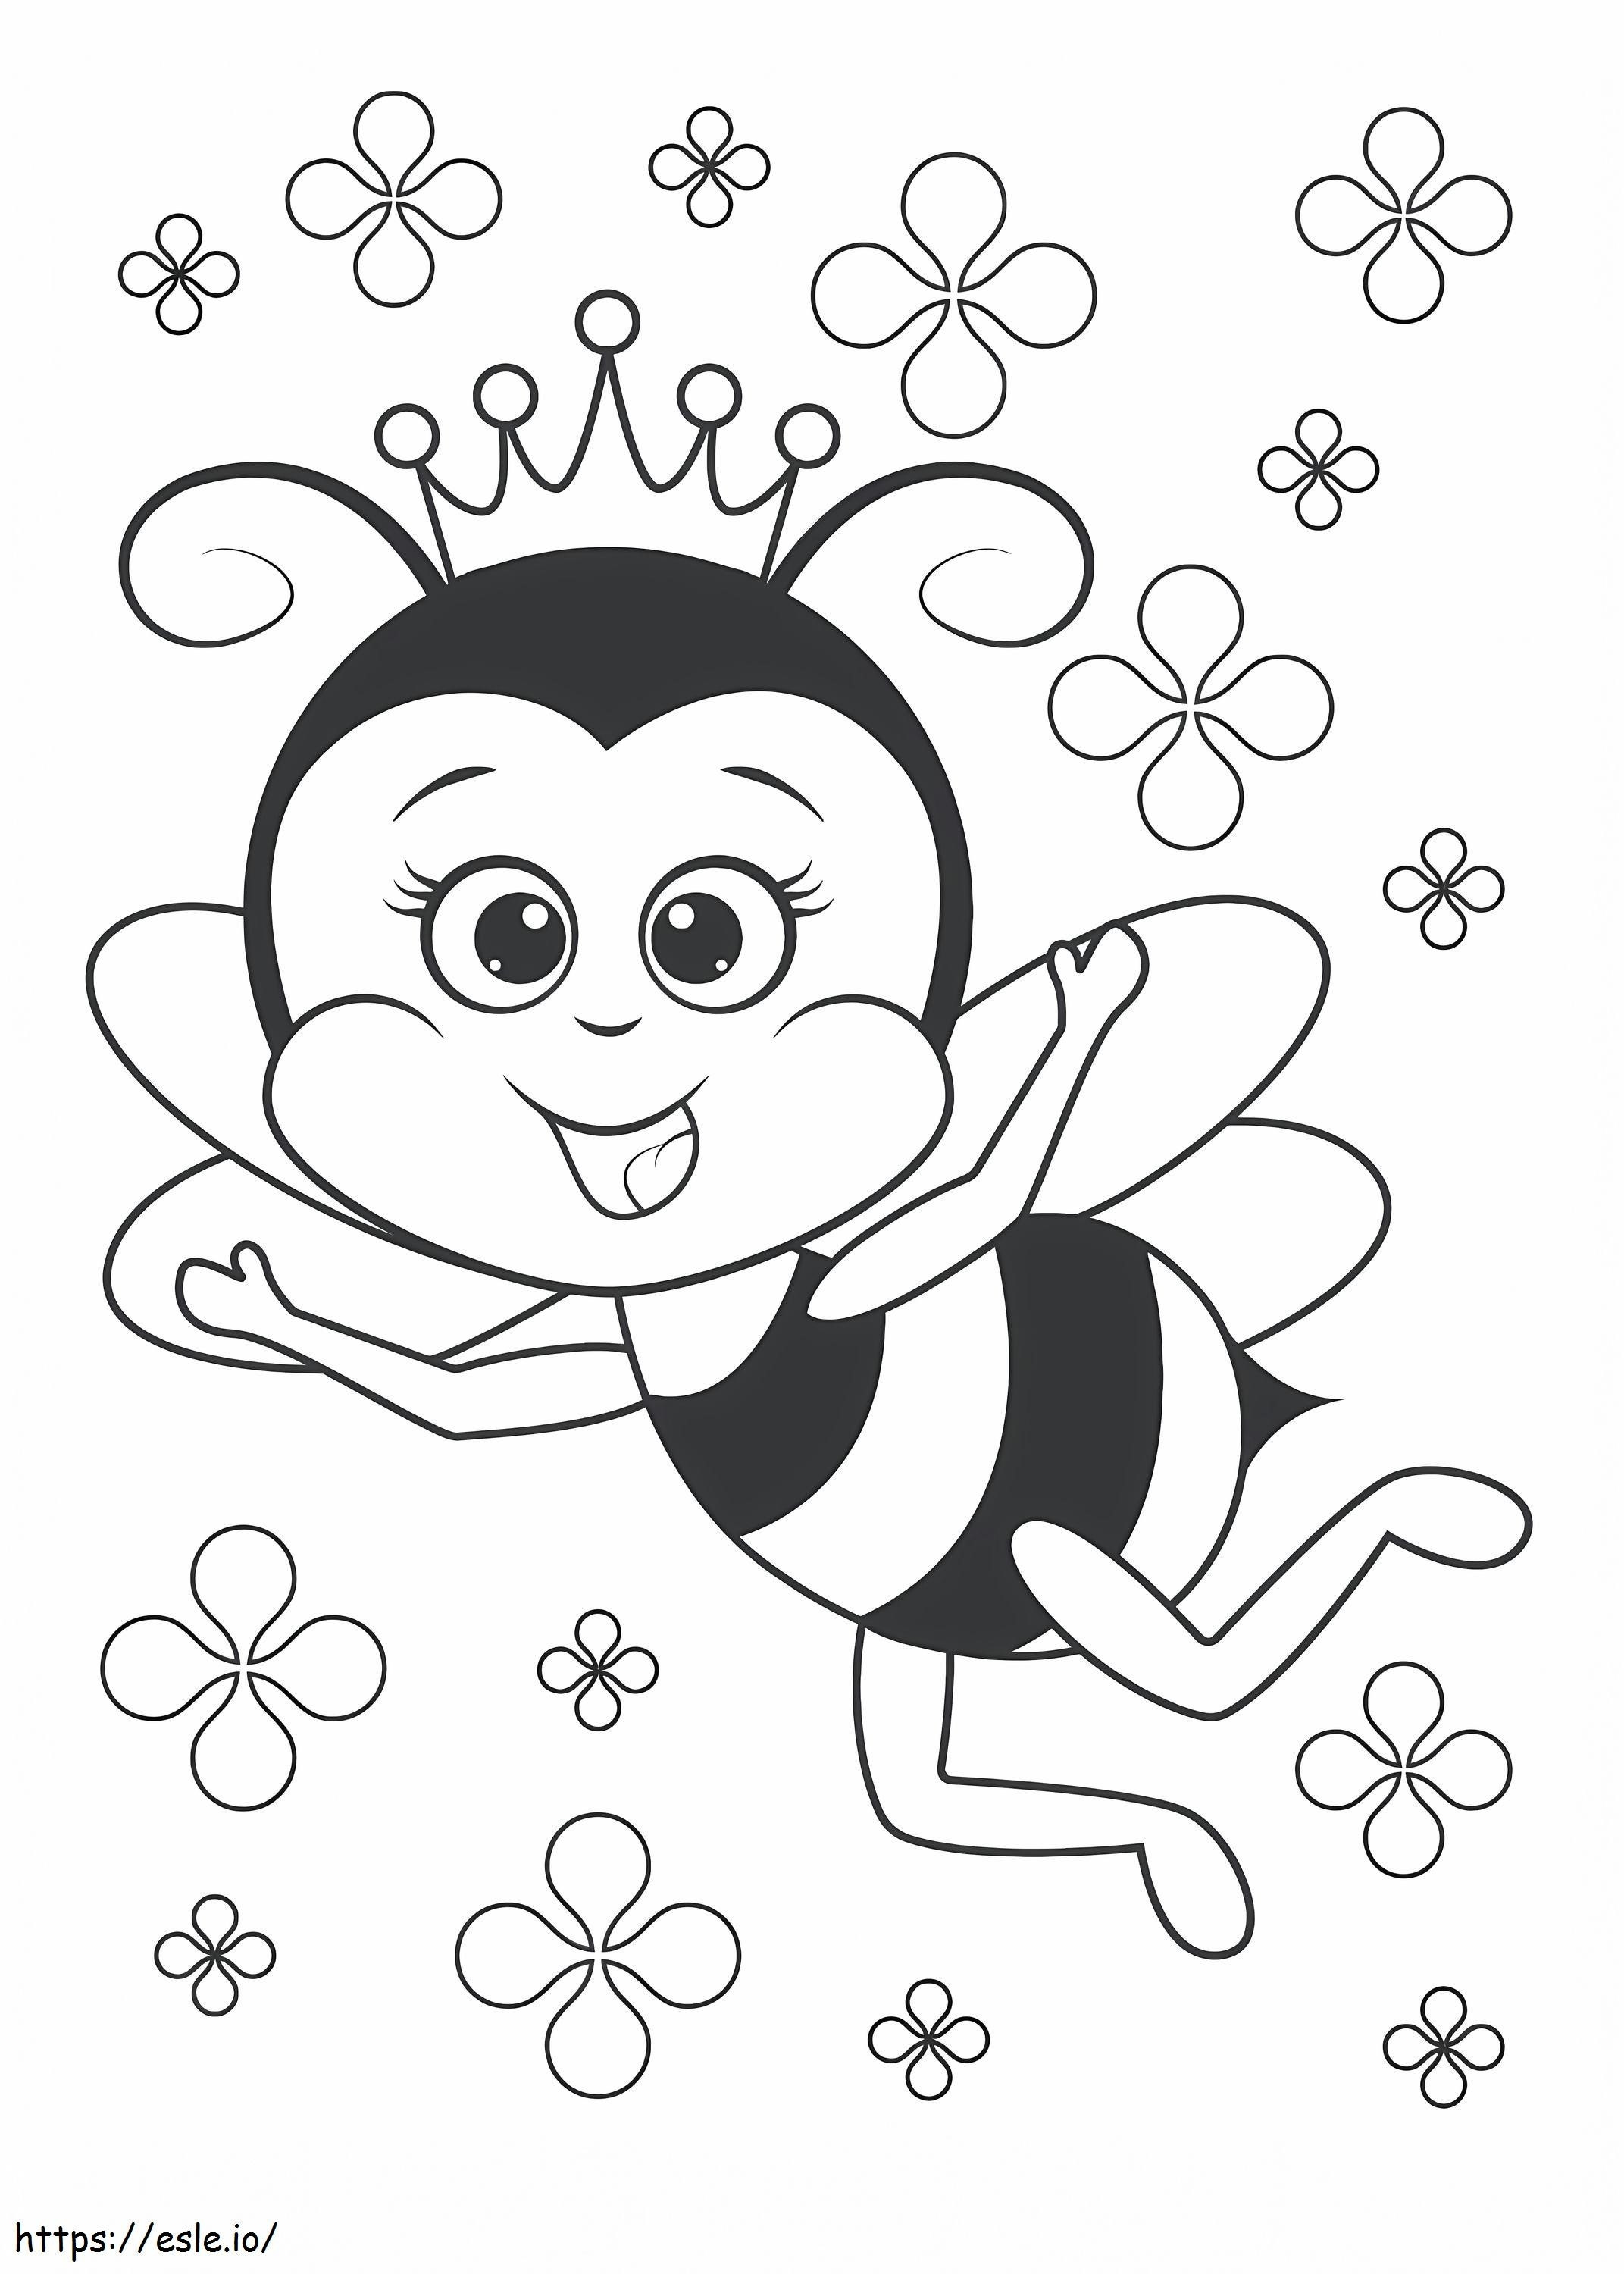 Queen Bee With Flowers coloring page